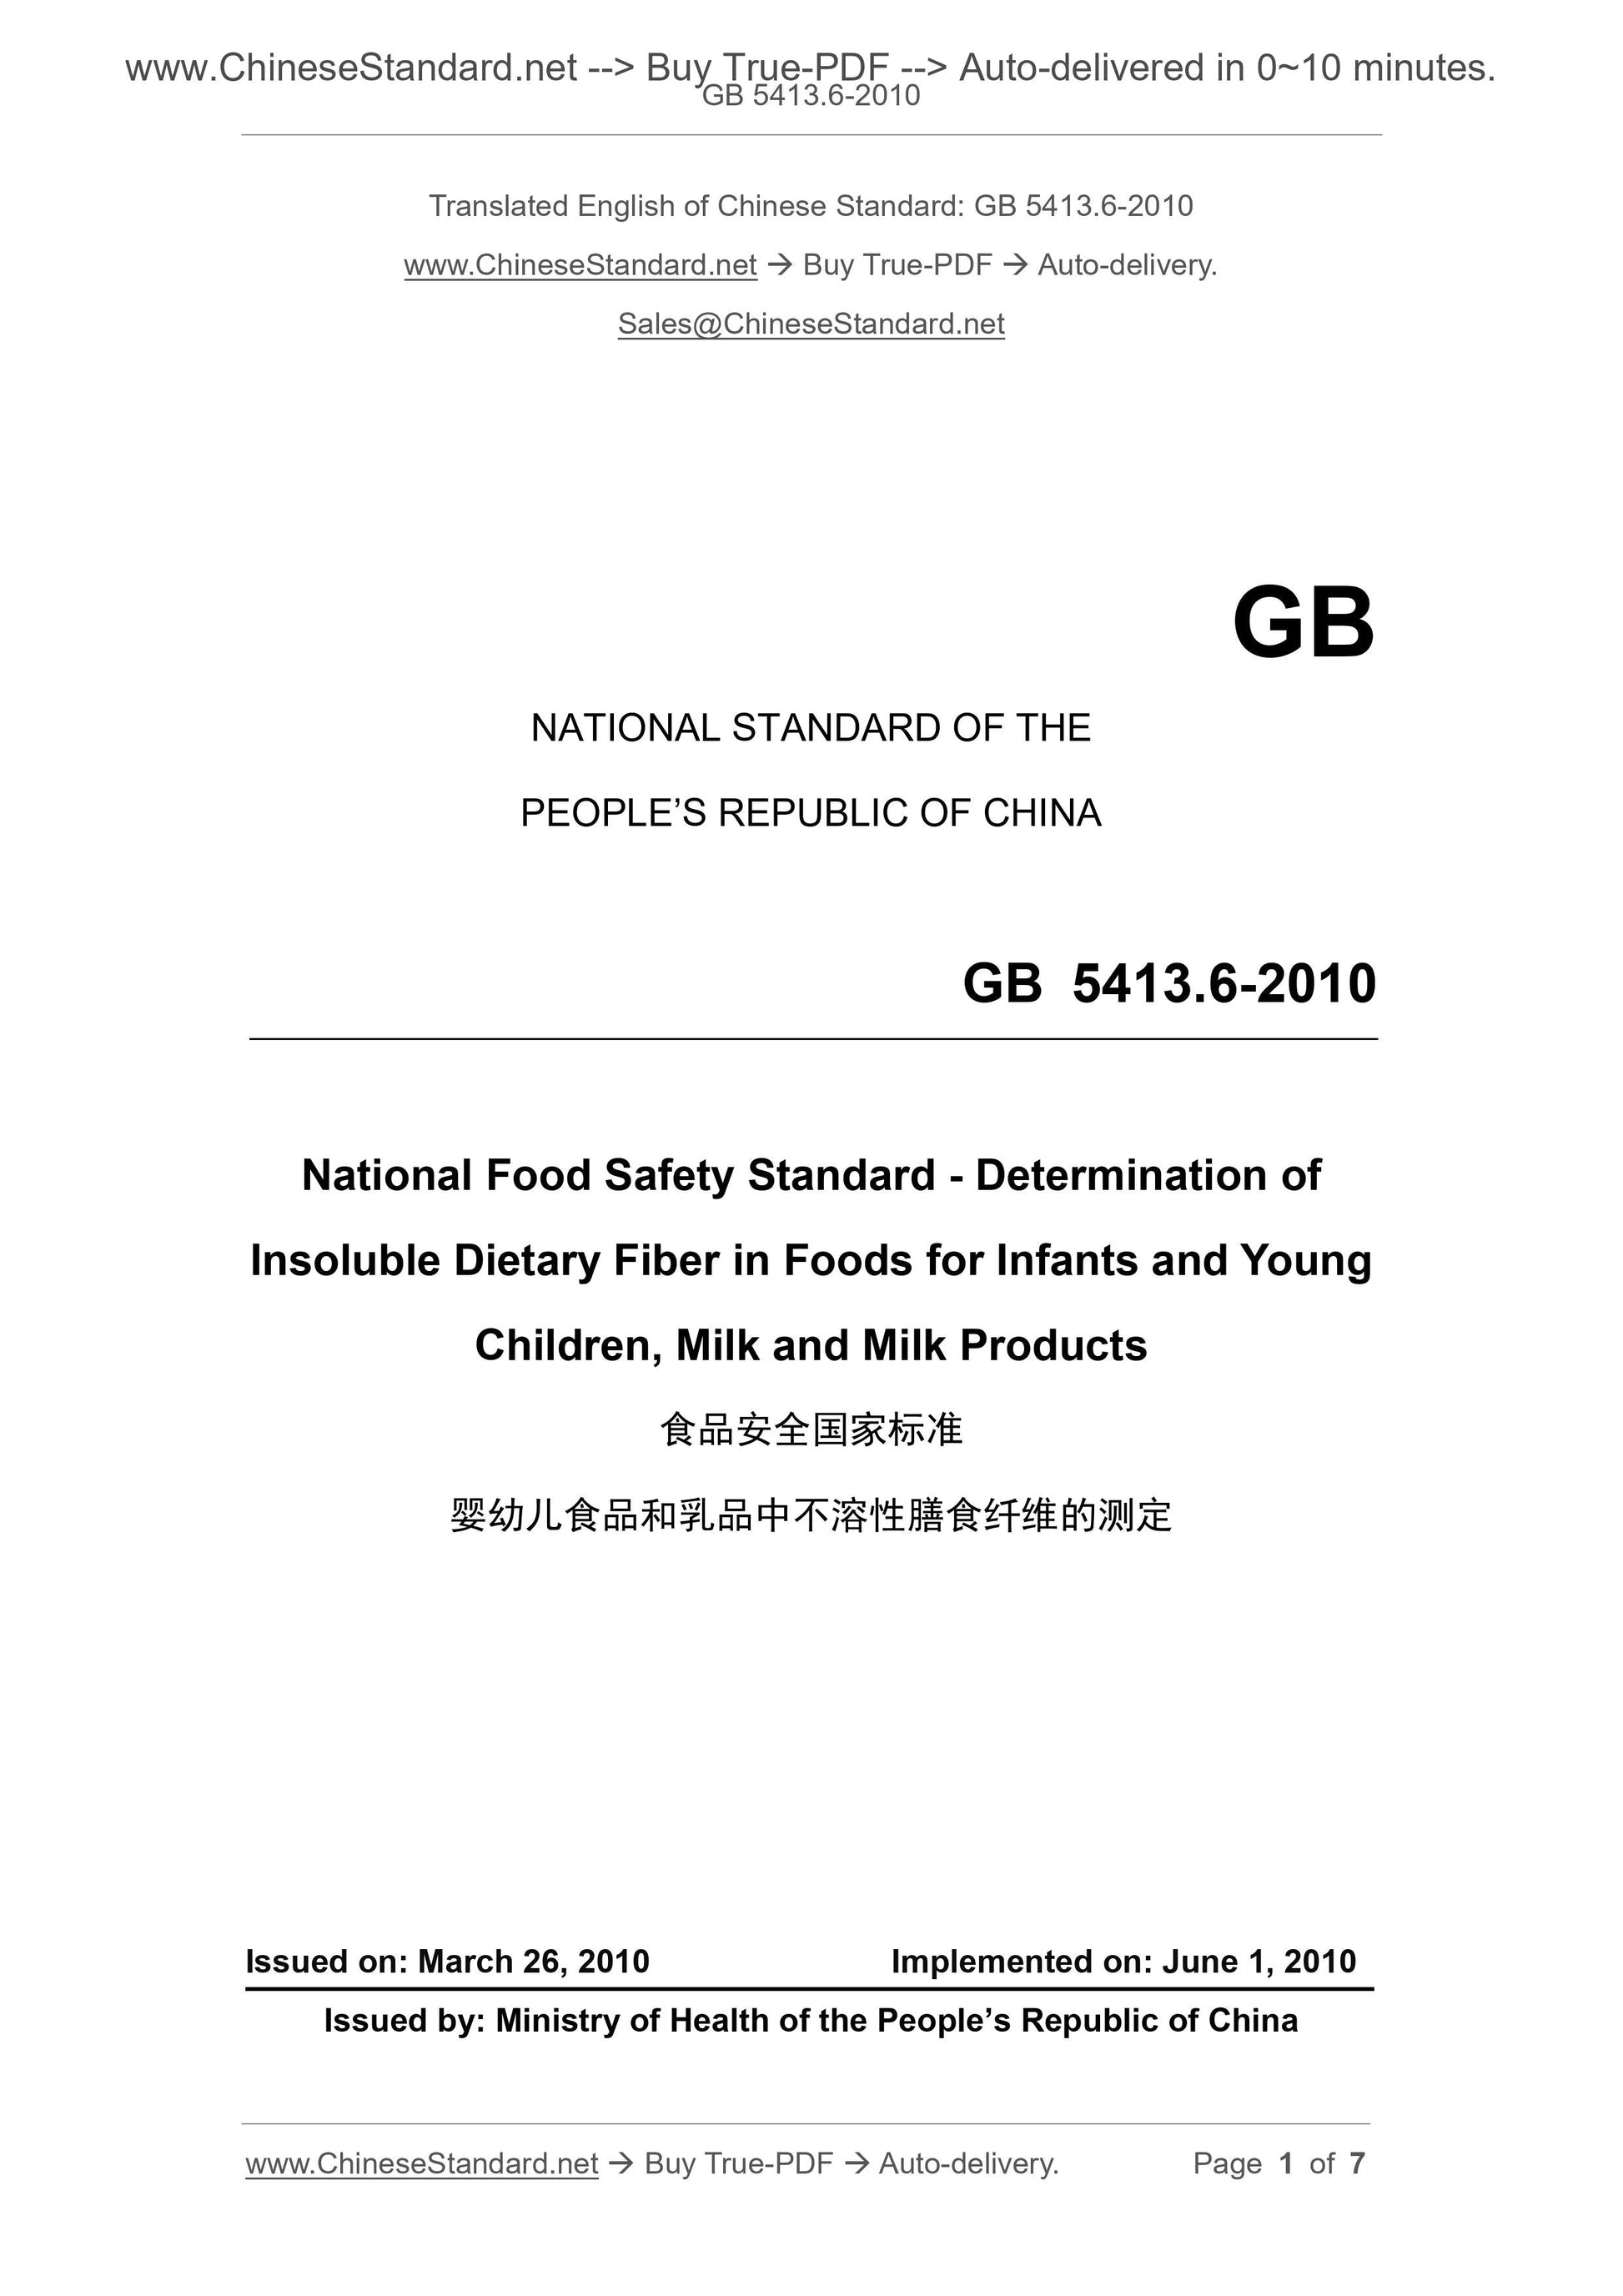 GB 5413.6-2010 Page 1